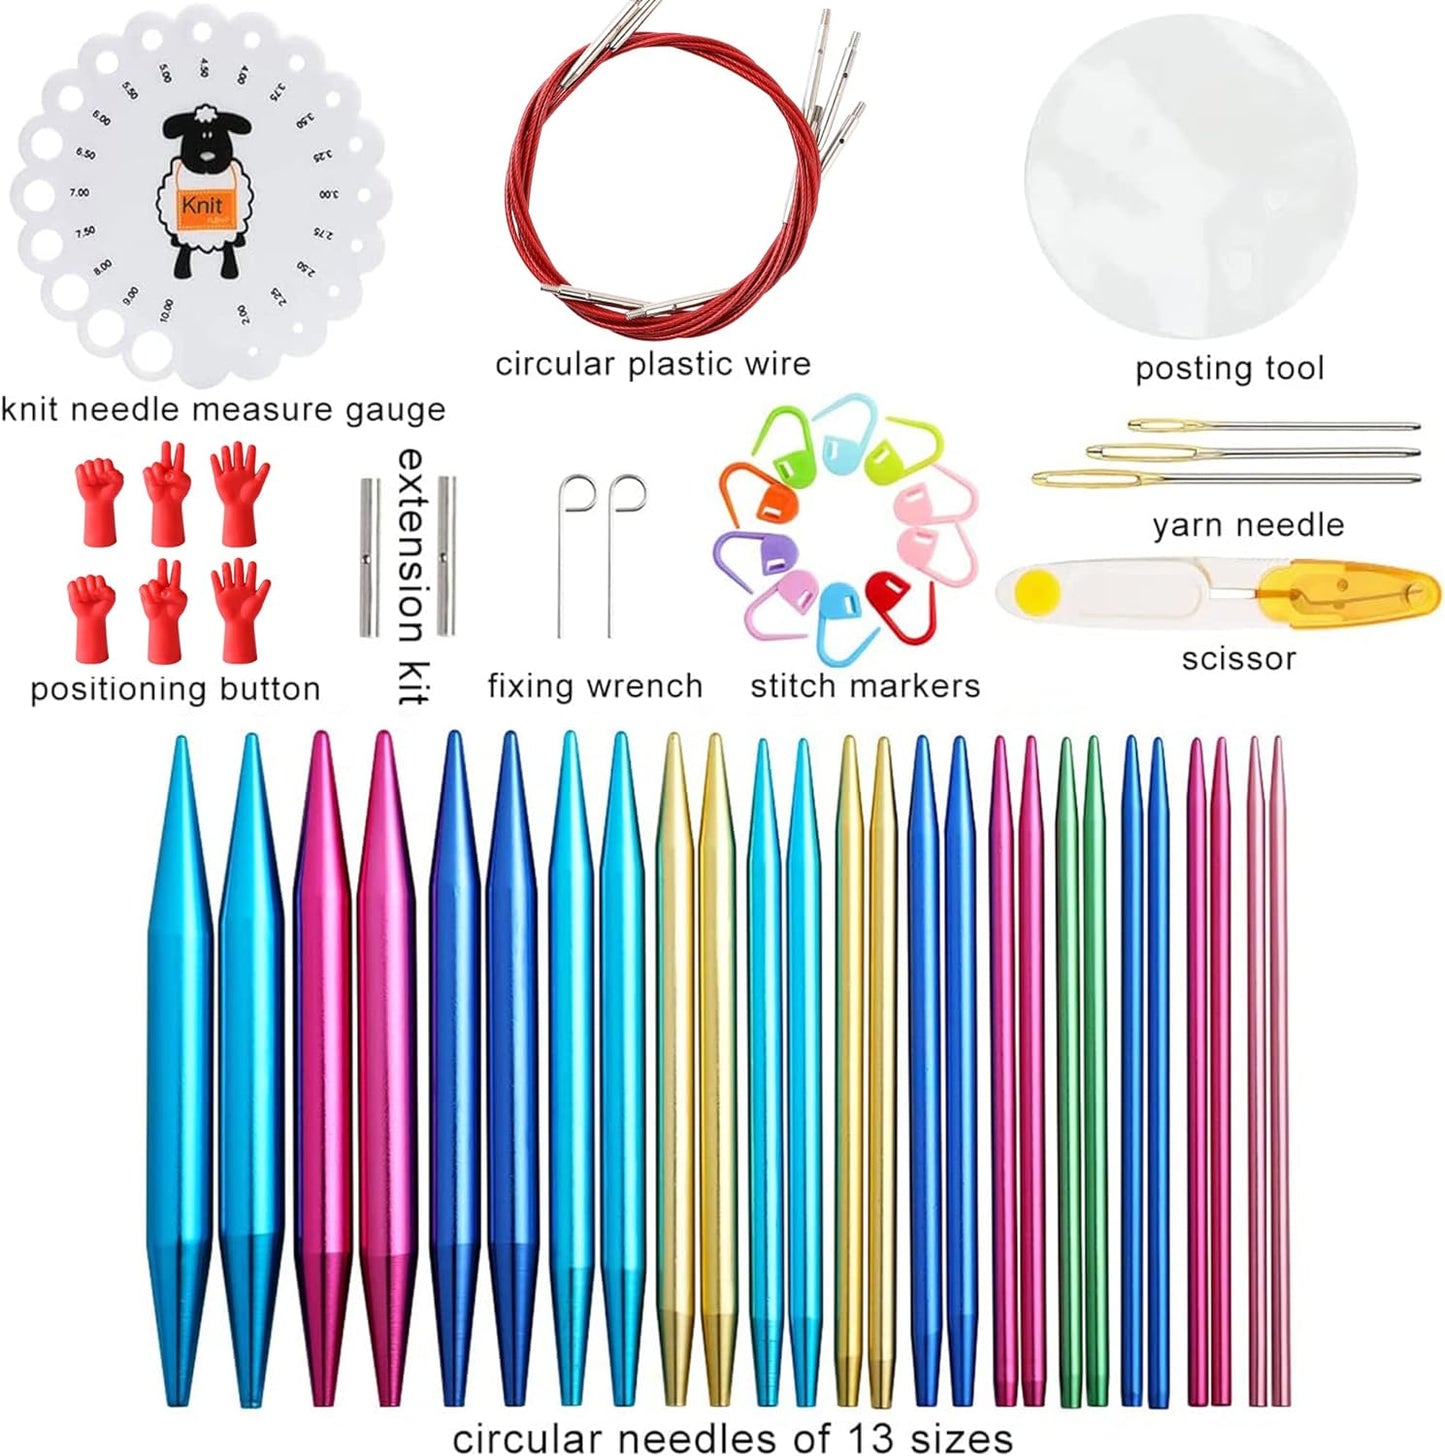 57Pcs Aluminum Circular Knitting Needles Set with Ergonomic Handles,13 Size Interchangeable Crochet Needles with Storage Case for Small Project (Style 1)